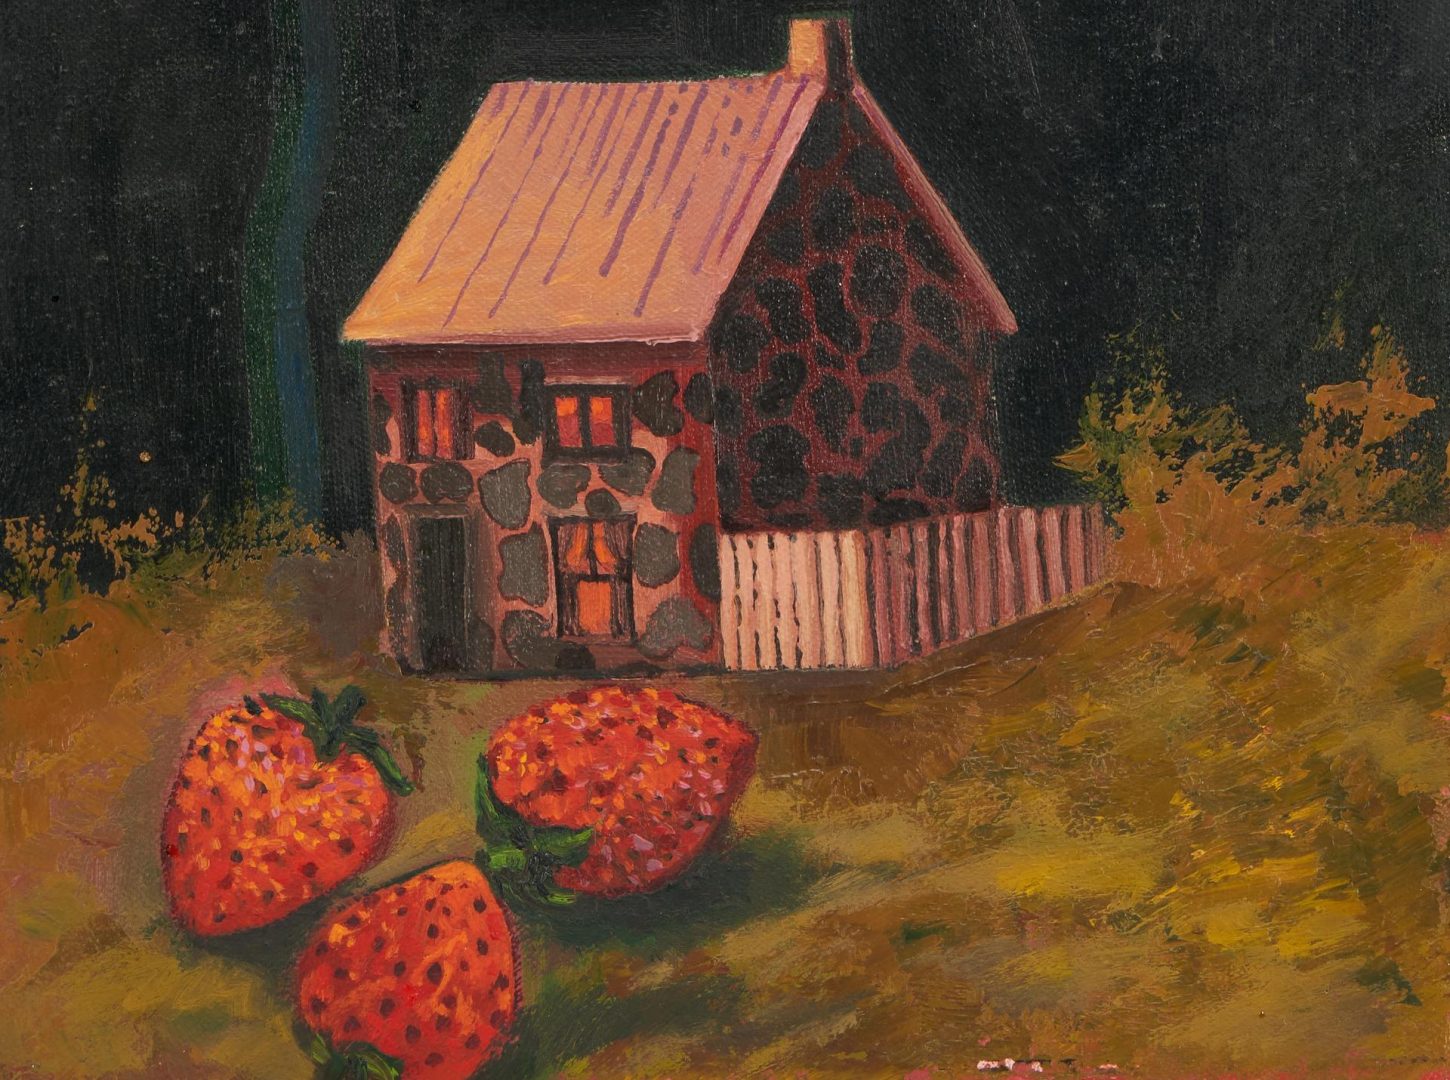 Lot 366: 2 Exhibited Peter Paone Paintings, Halloween & Strawberry Farm